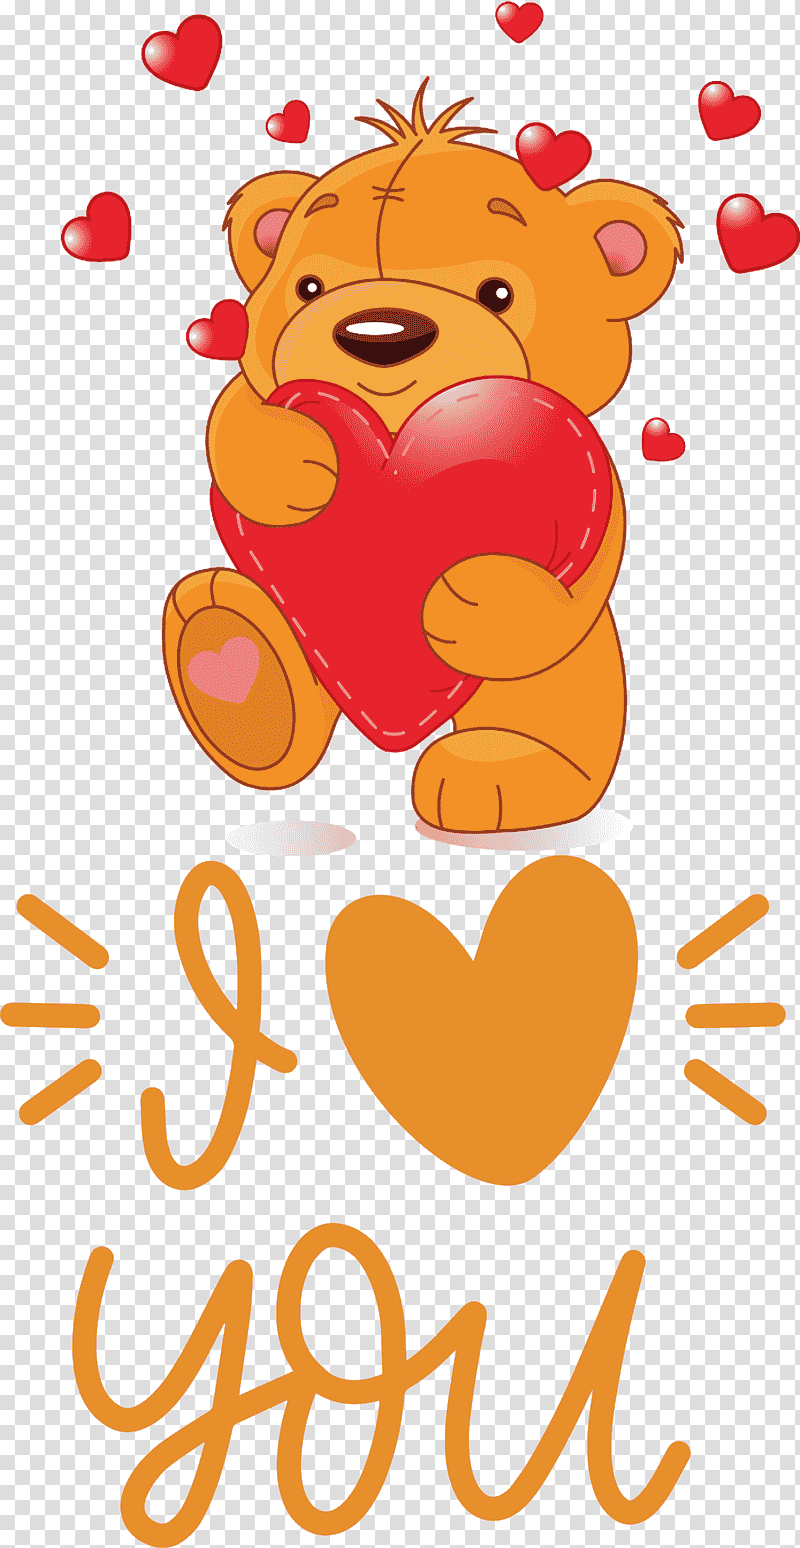 I Love You Valentines Day, Bears, Teddy Bear, Heart, Giant Panda, Cuteness, Love Hearts transparent background PNG clipart